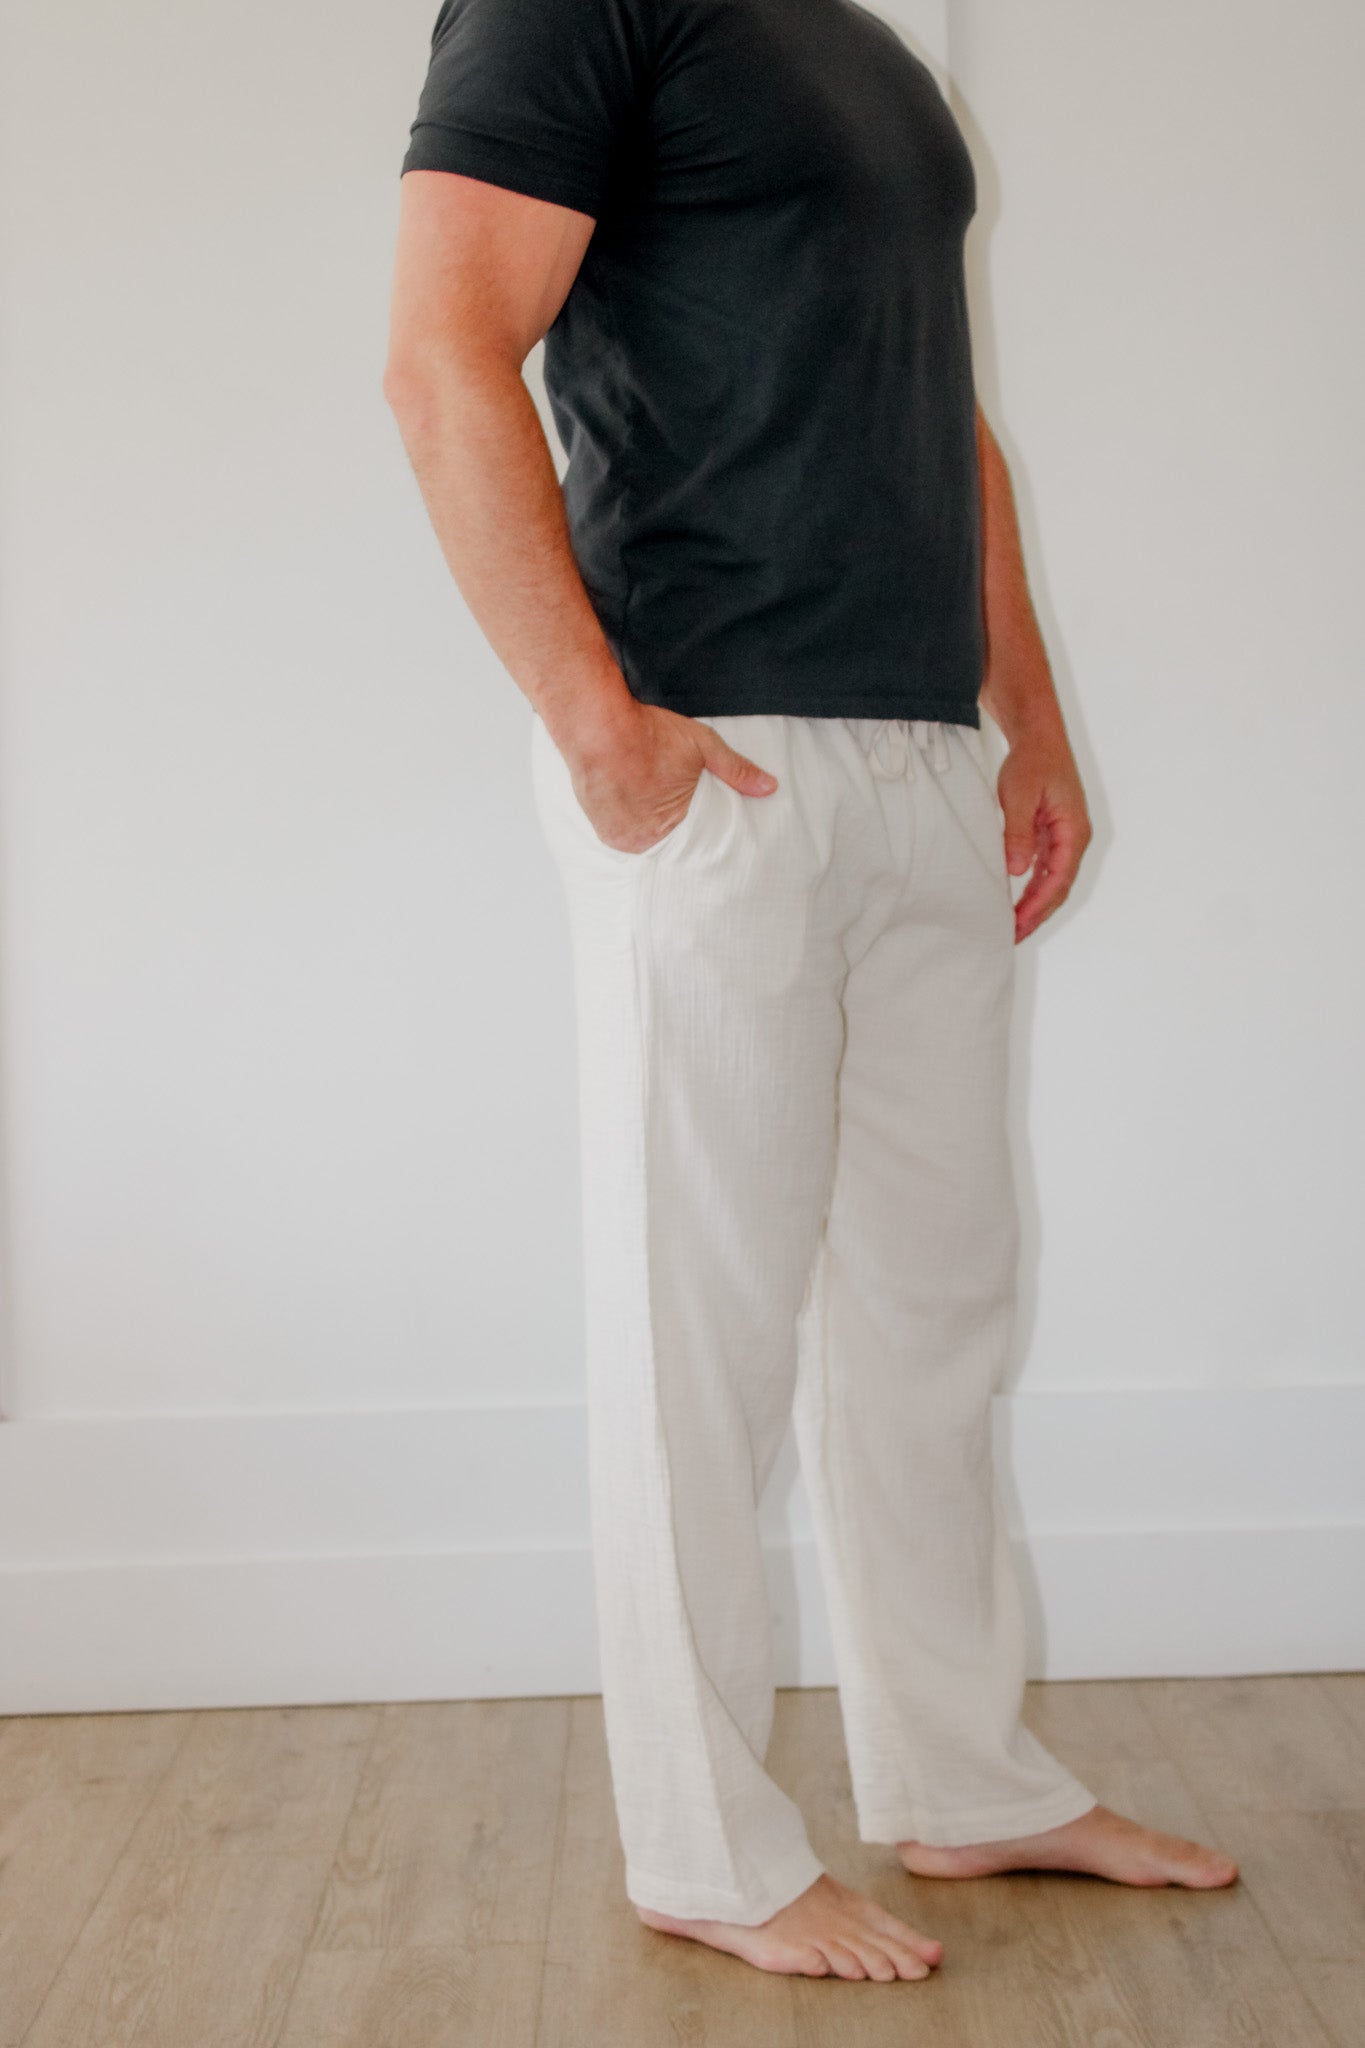 NORDLICHT Leja Natur muslin trousers made from organic cotton